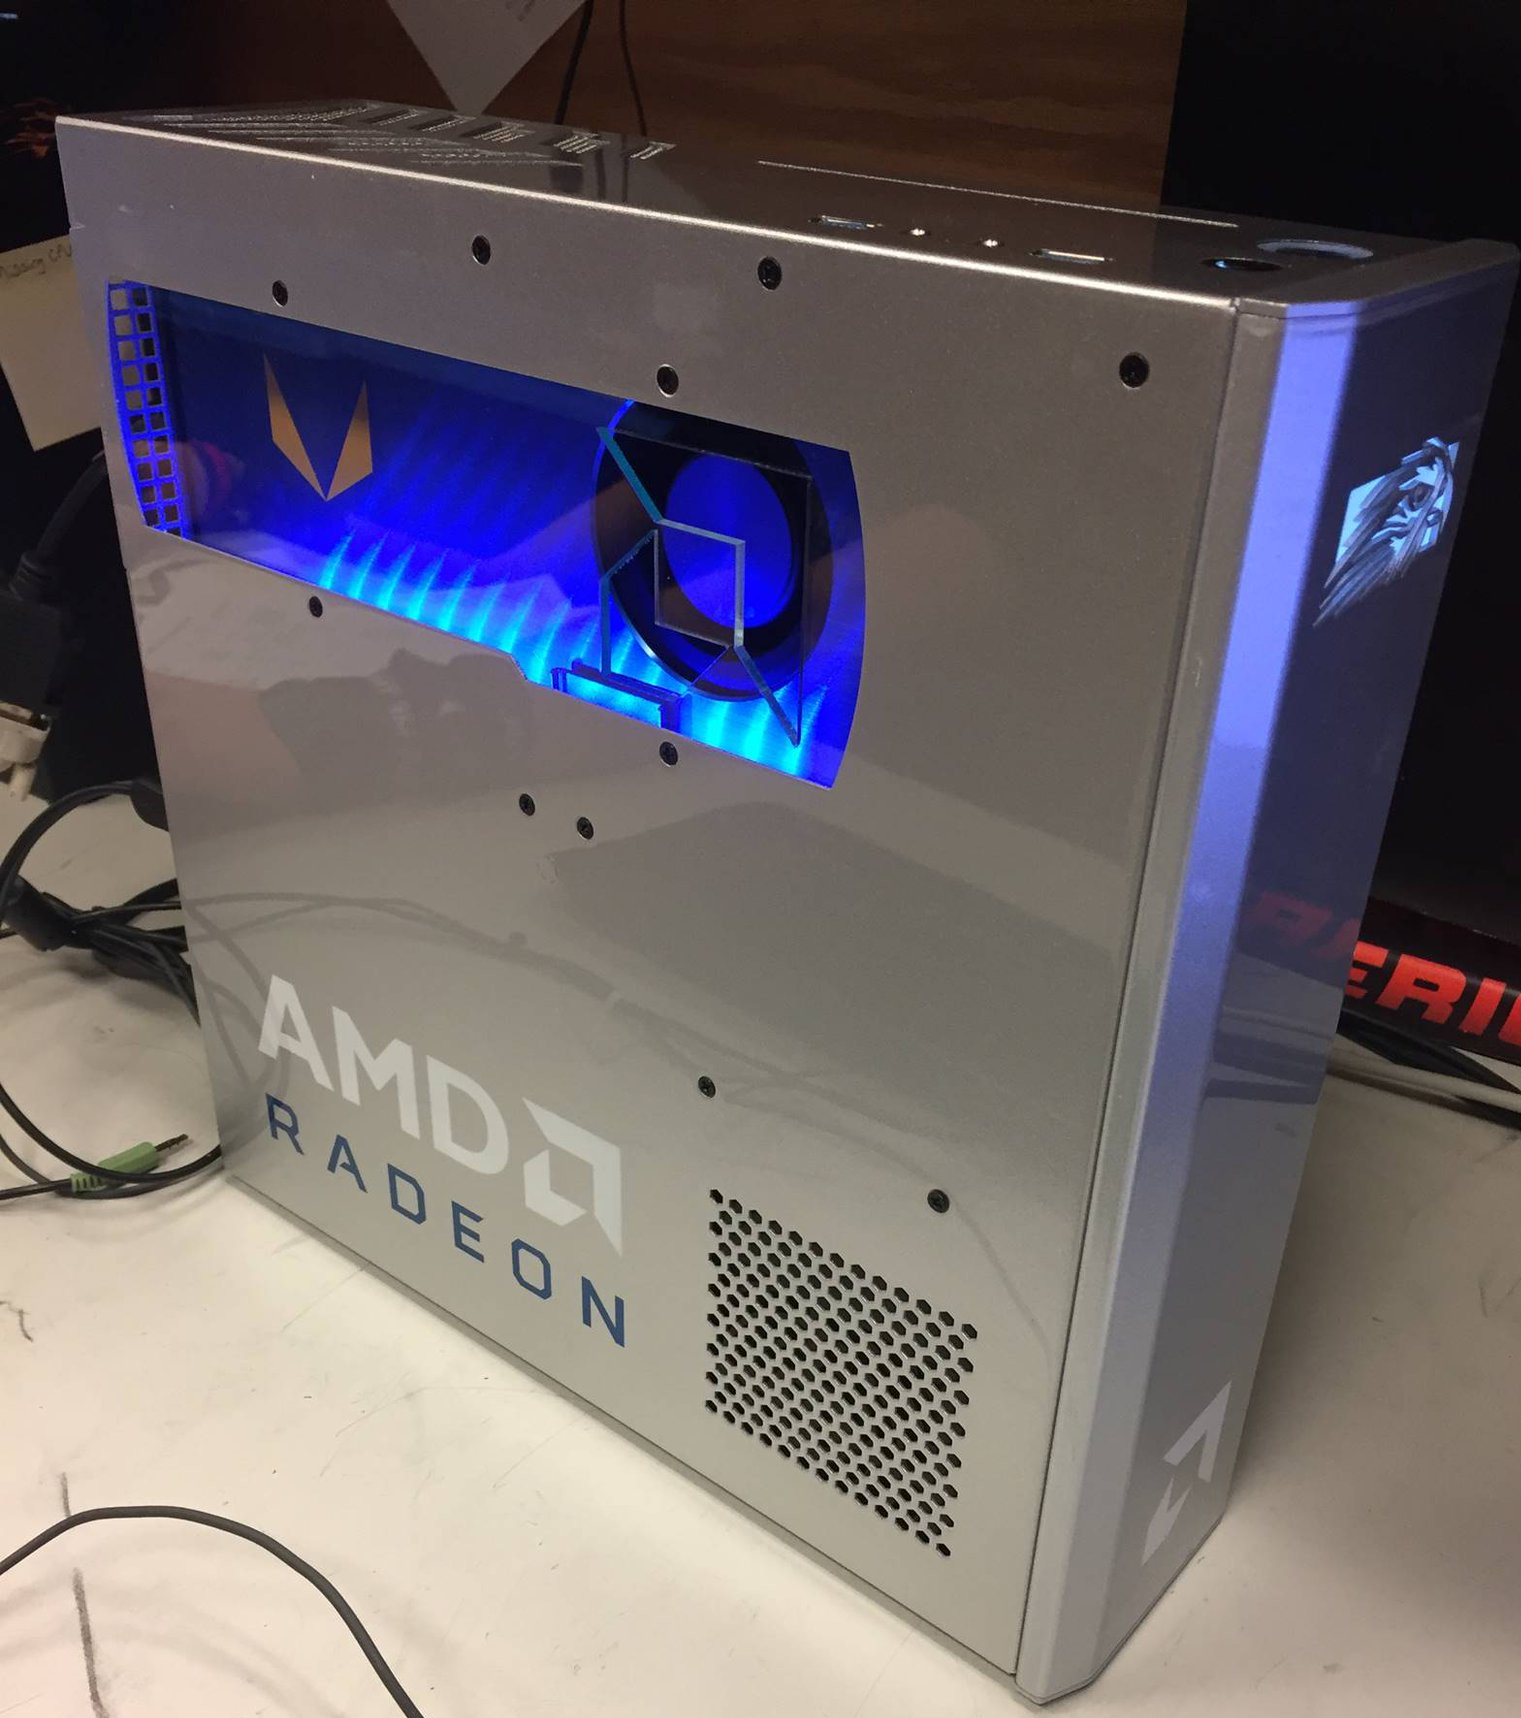 Media asset in full size related to 3dfxzone.it news item entitled as follows: Falcon Northwest mostra in anteprima un PC con Radeon Pro Vega Frontier Edition | Image Name: news26587_Falcon-Northwest-Tiki-Radeon-Pro-Vega-Frontier-Edition_1.jpg